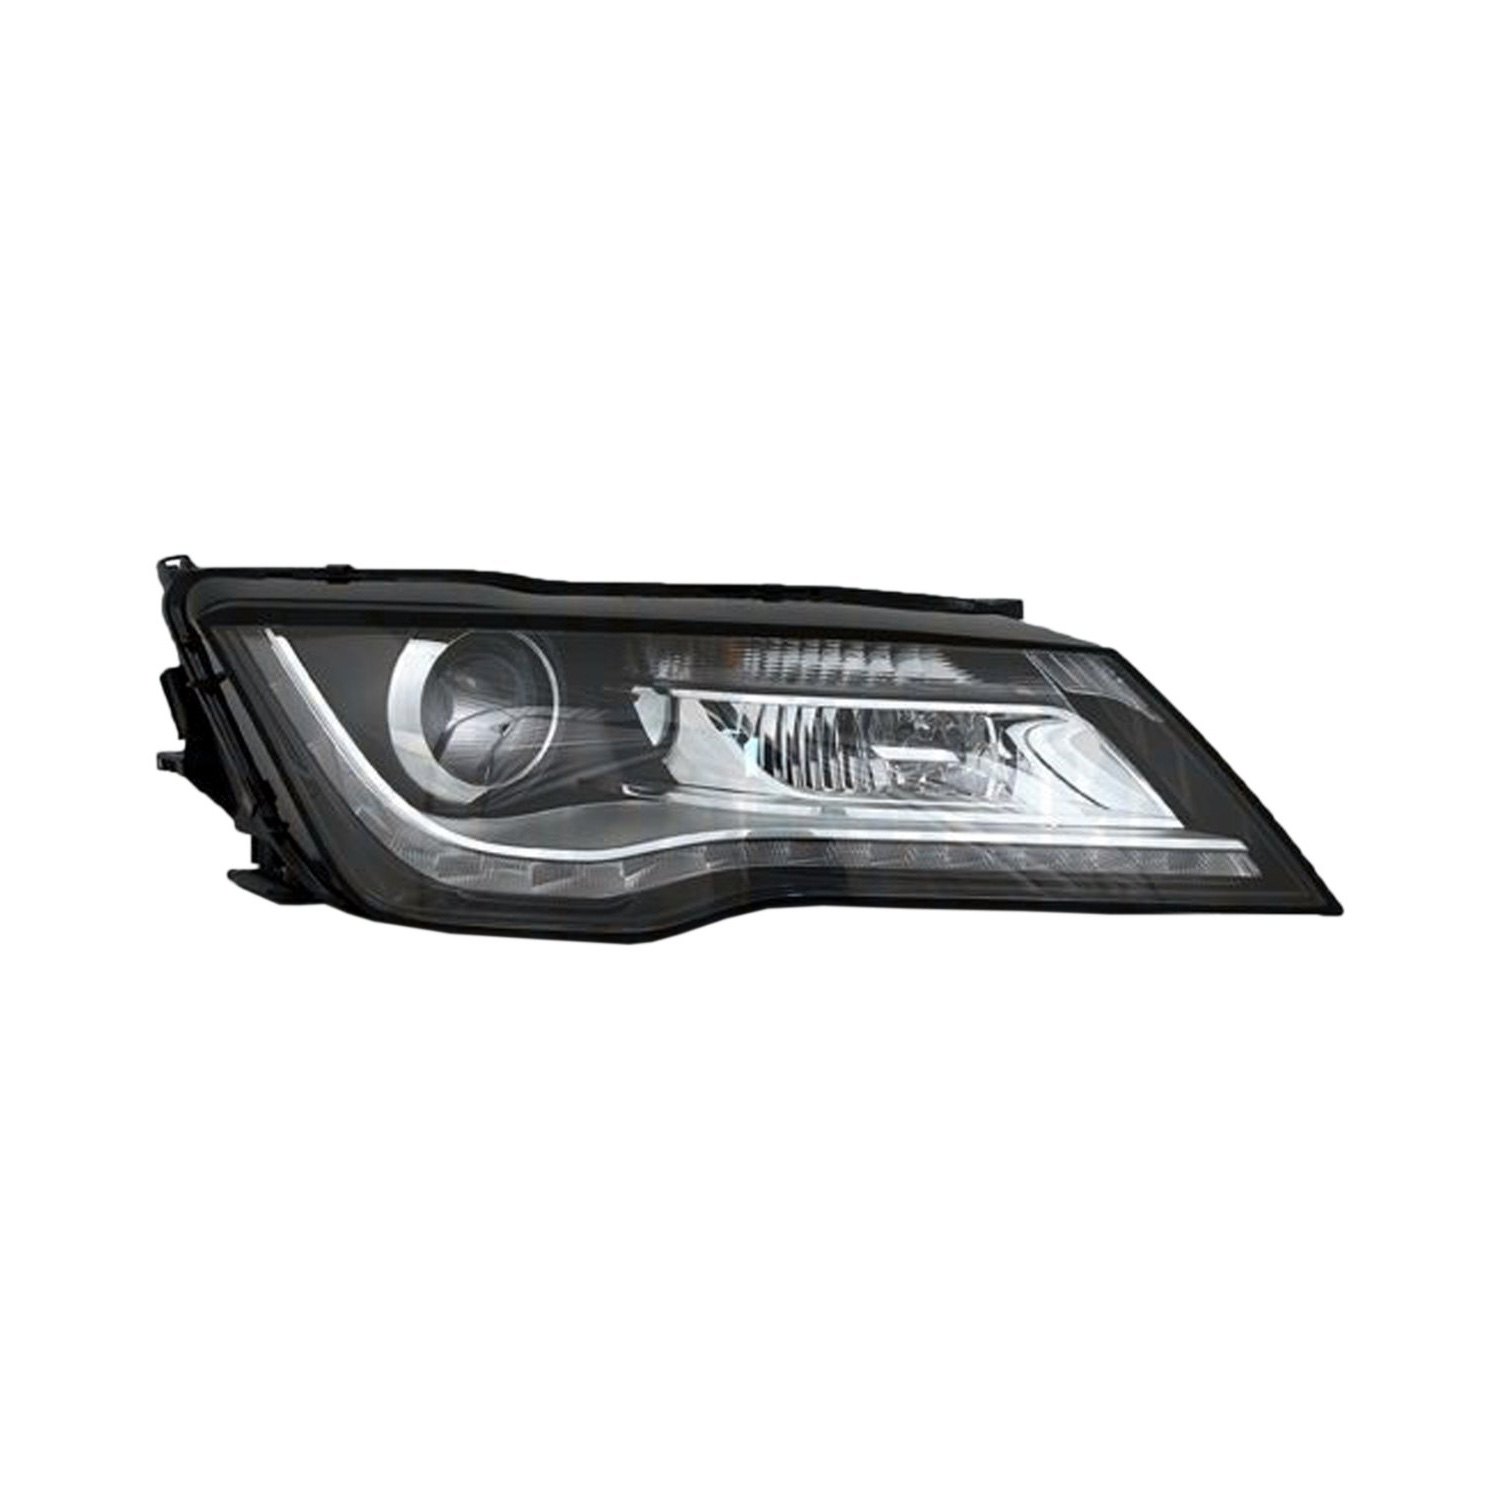 Replace® Audi A7 2016 Replacement Headlight